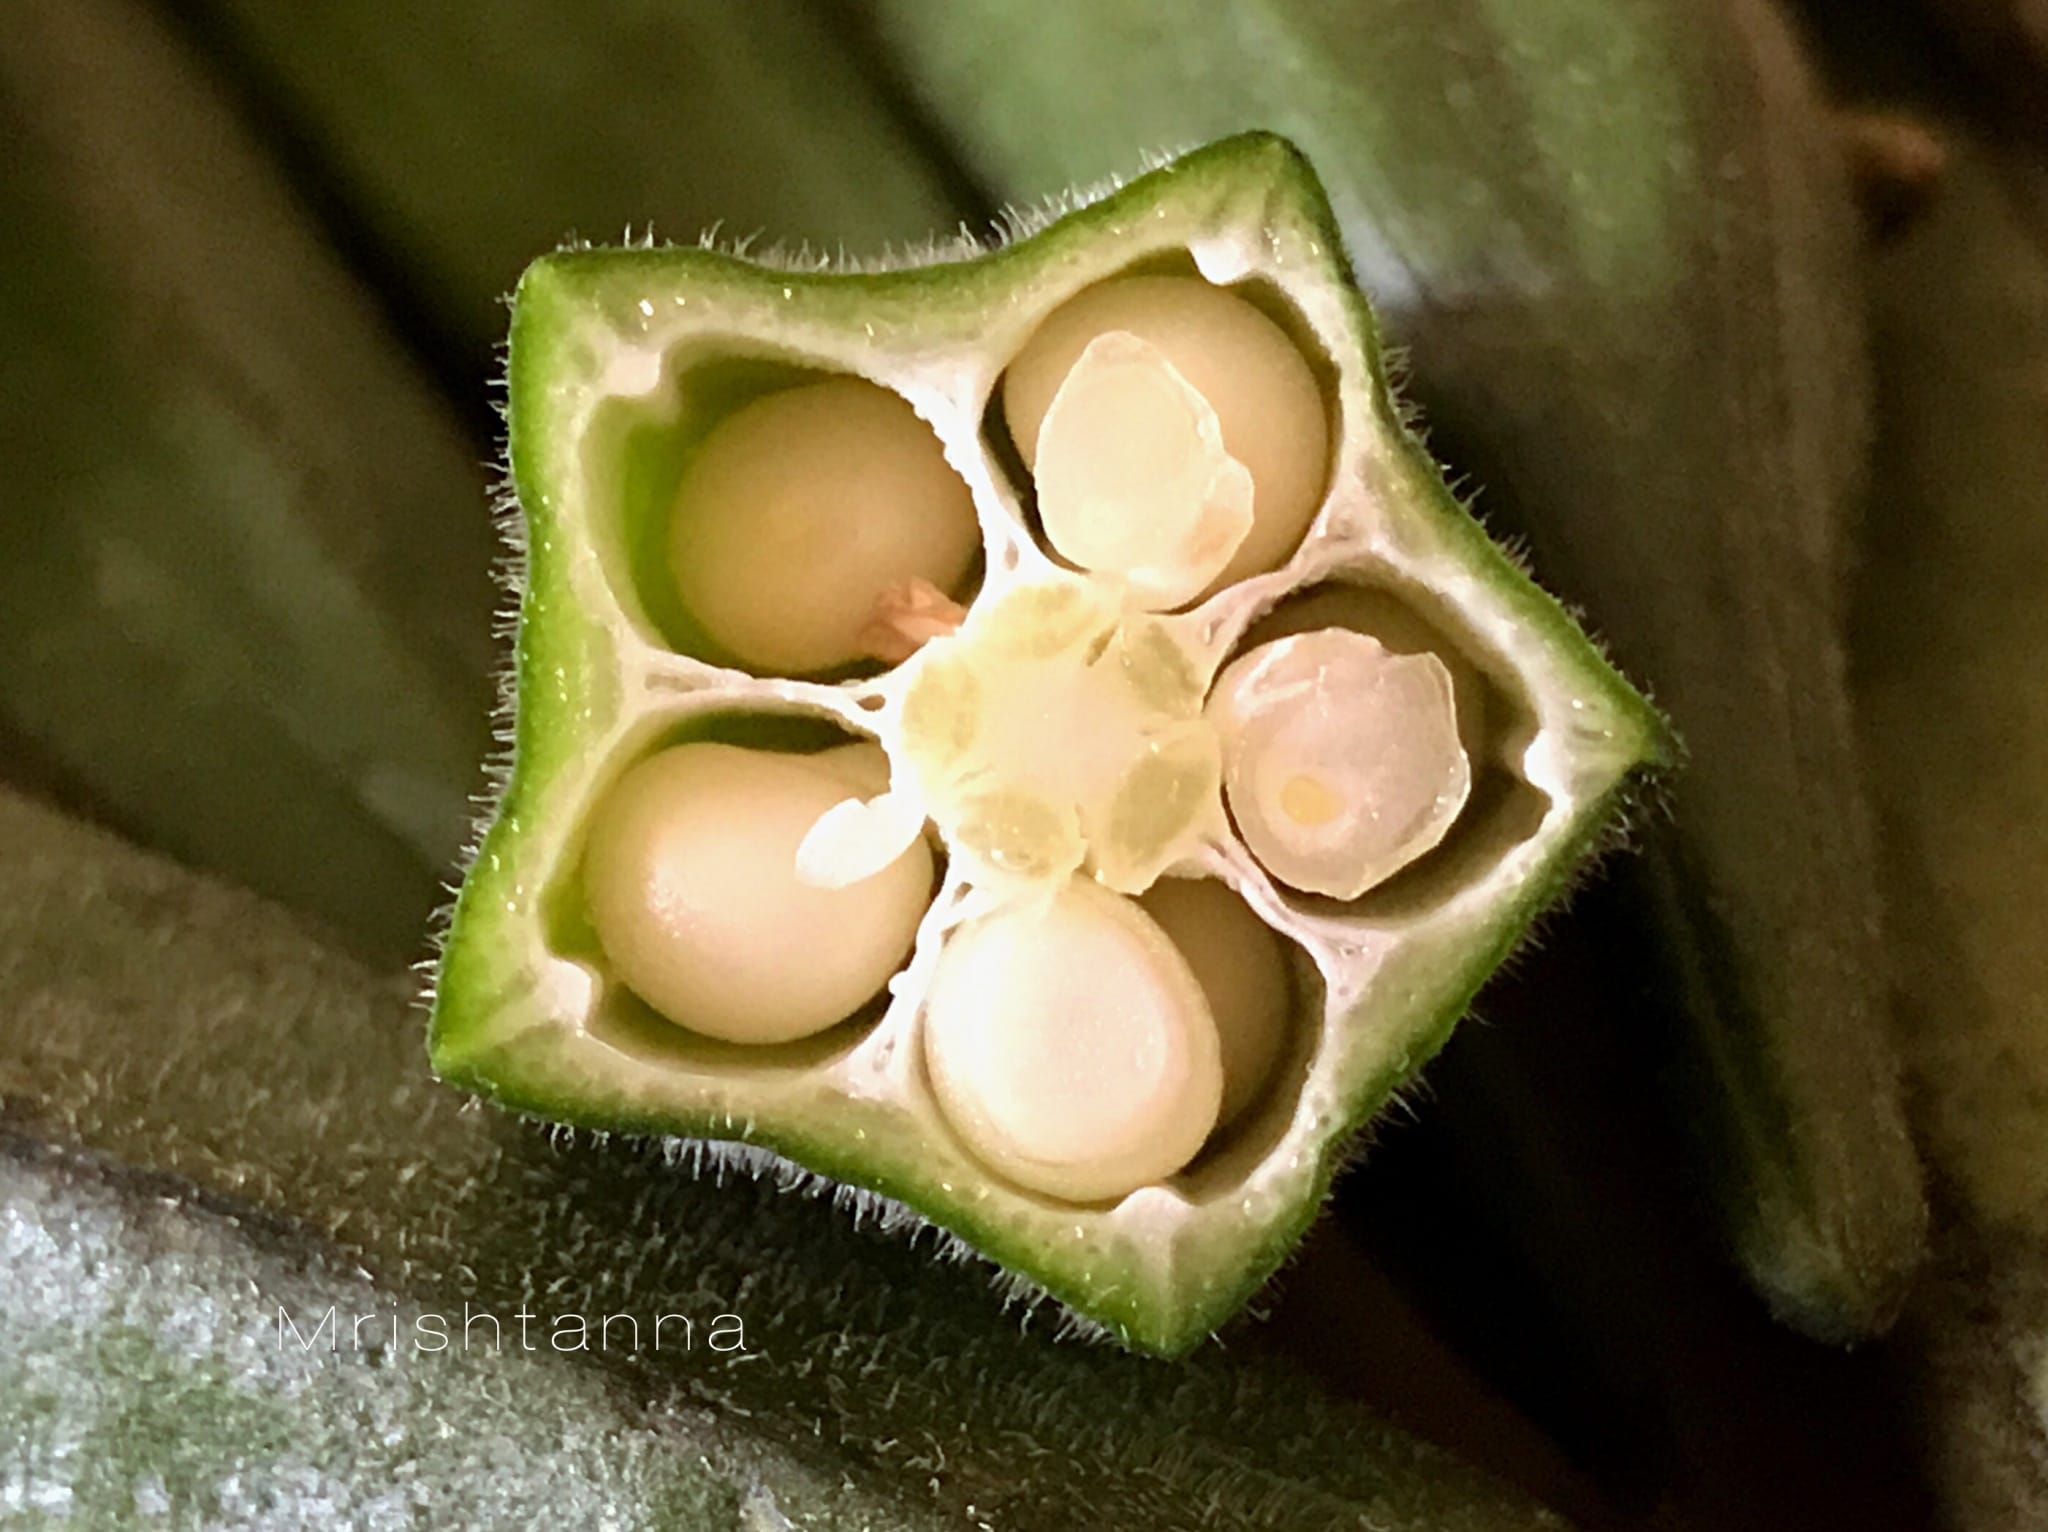 A close up of group of okra's